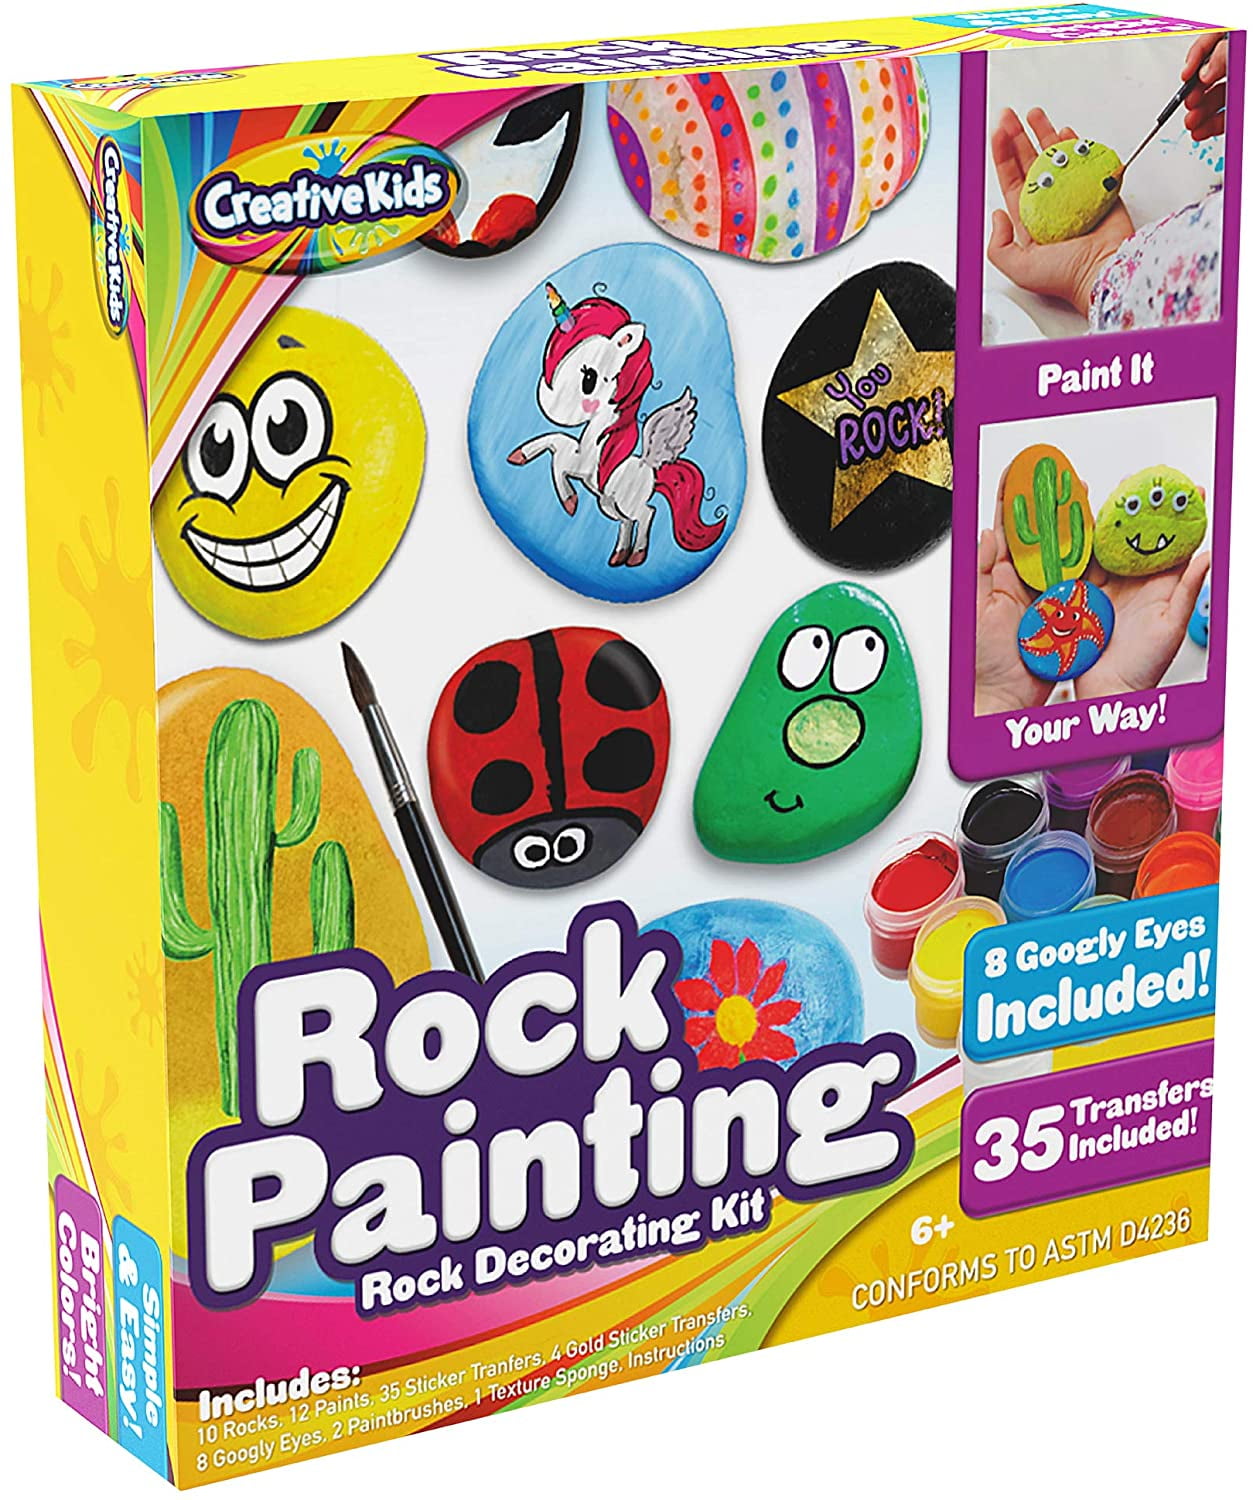 12 Rock Painting Kit, 43 Pcs Arts and Crafts for Kids Ages 6-8+